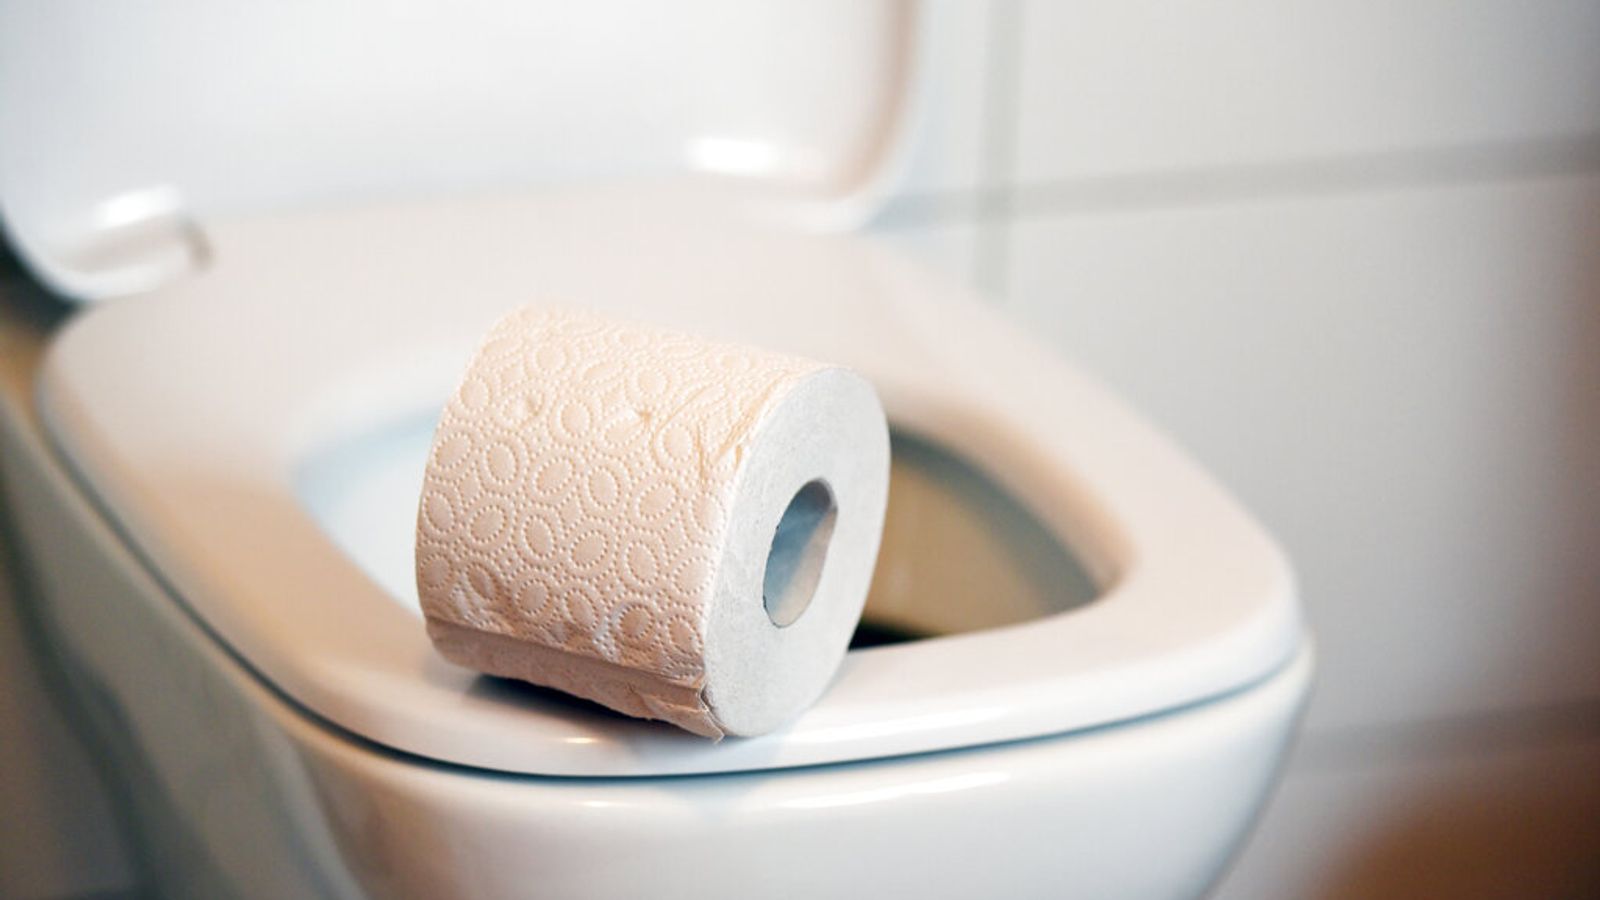 'Fashionable' toilet rolls making 'dubious' claims about being made from bamboo, Which? finds